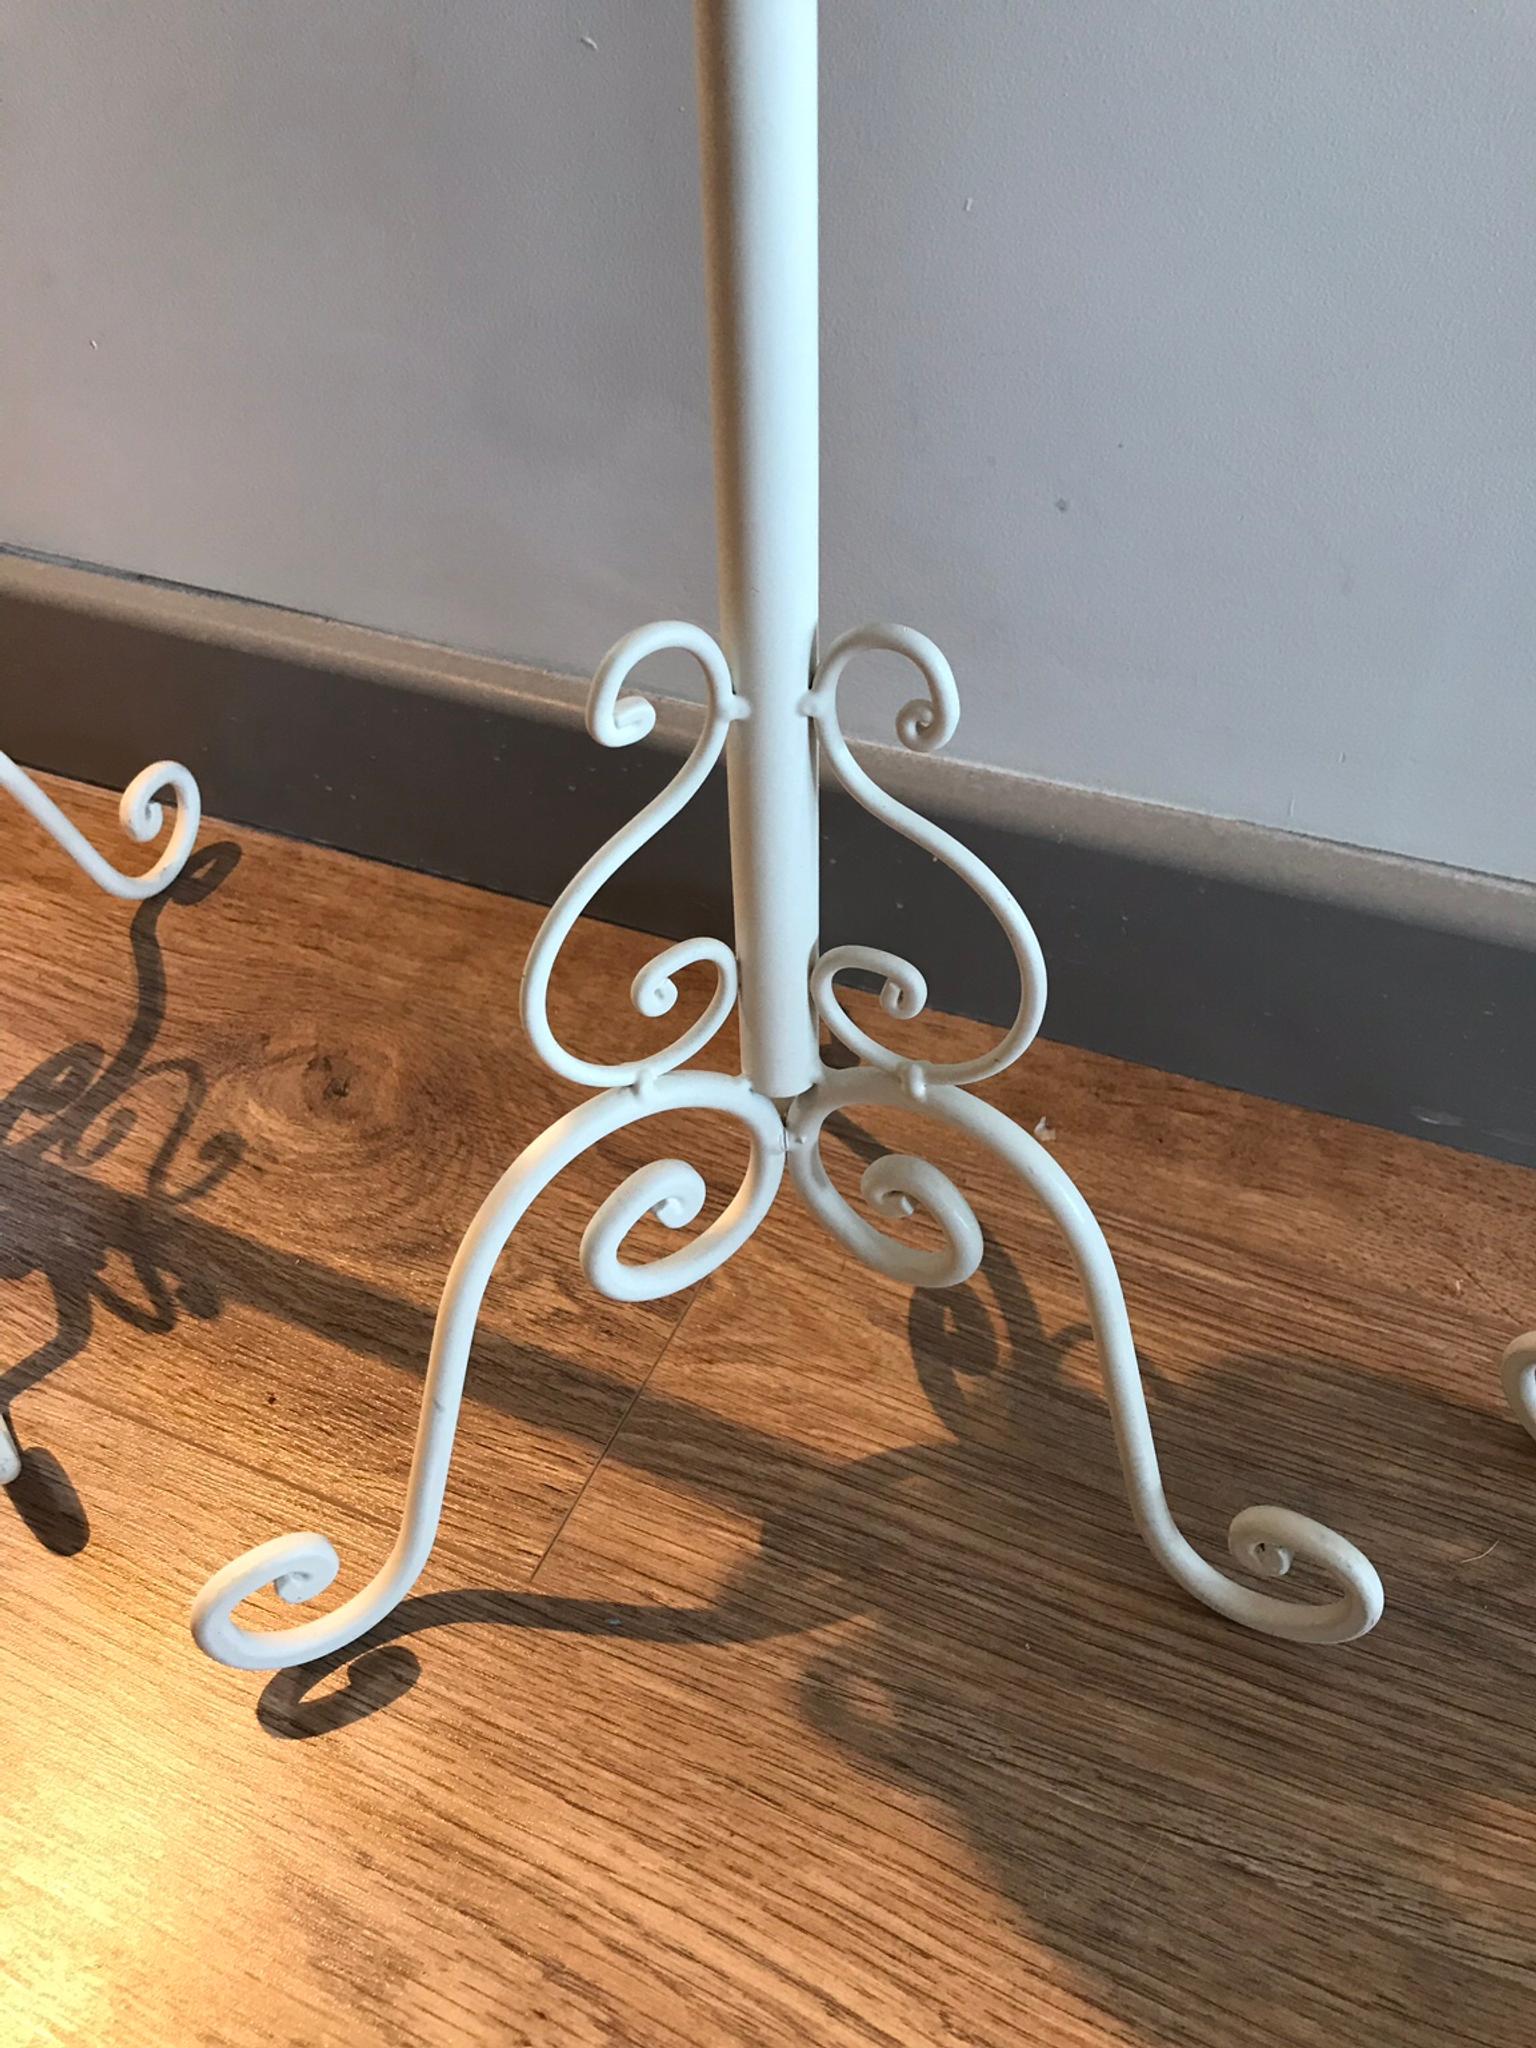 Free Standing Candle Holder One Or Set Of 3 In E10 London Fur 10